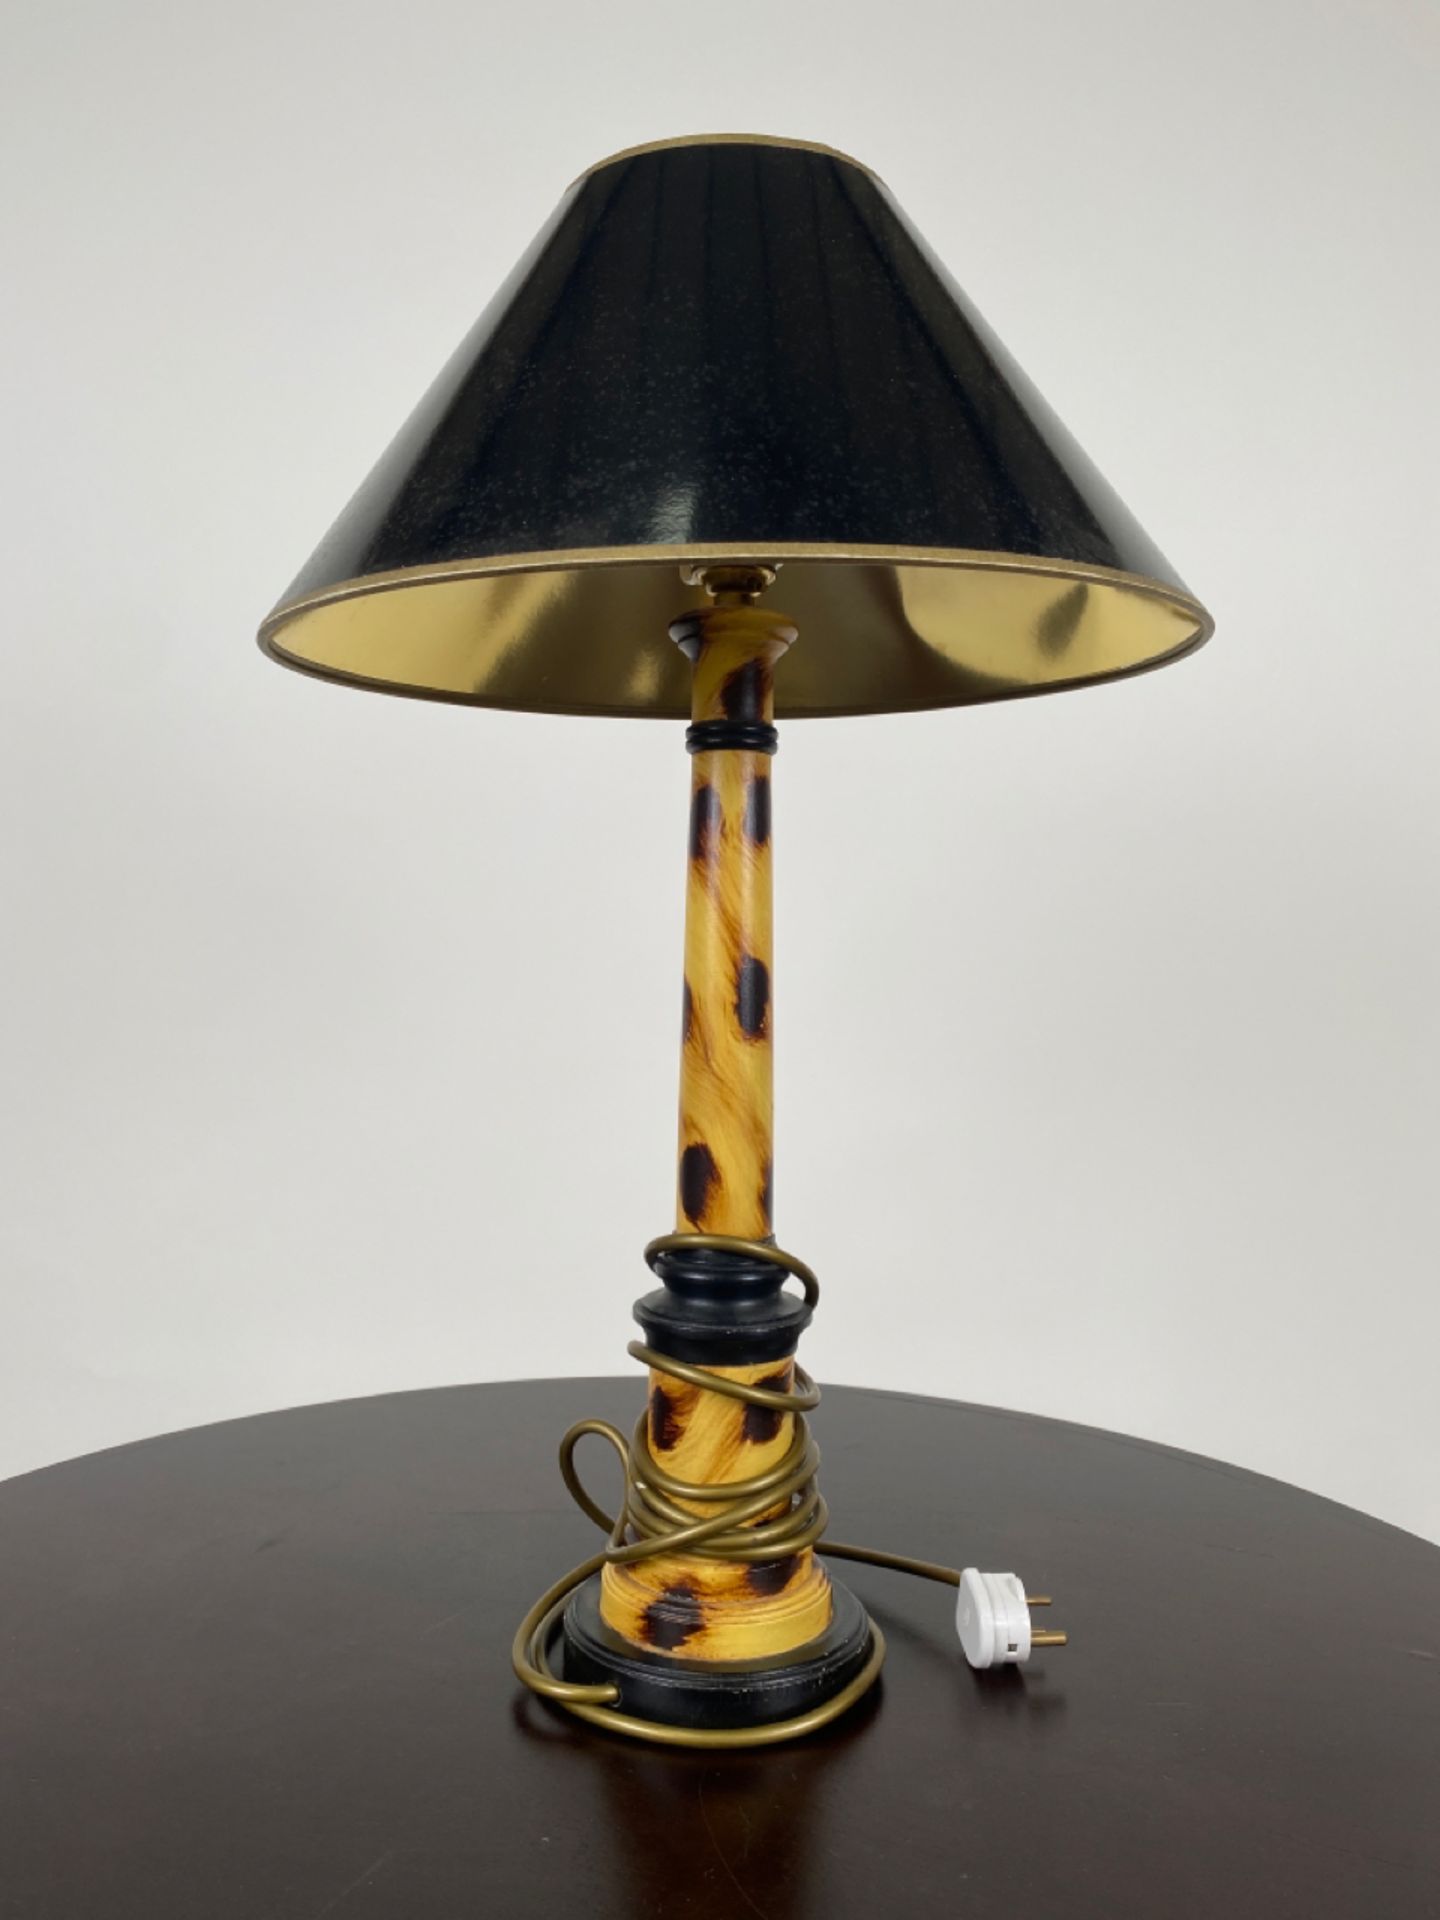 Pair of Leopard Print Table Lamps - Image 2 of 4